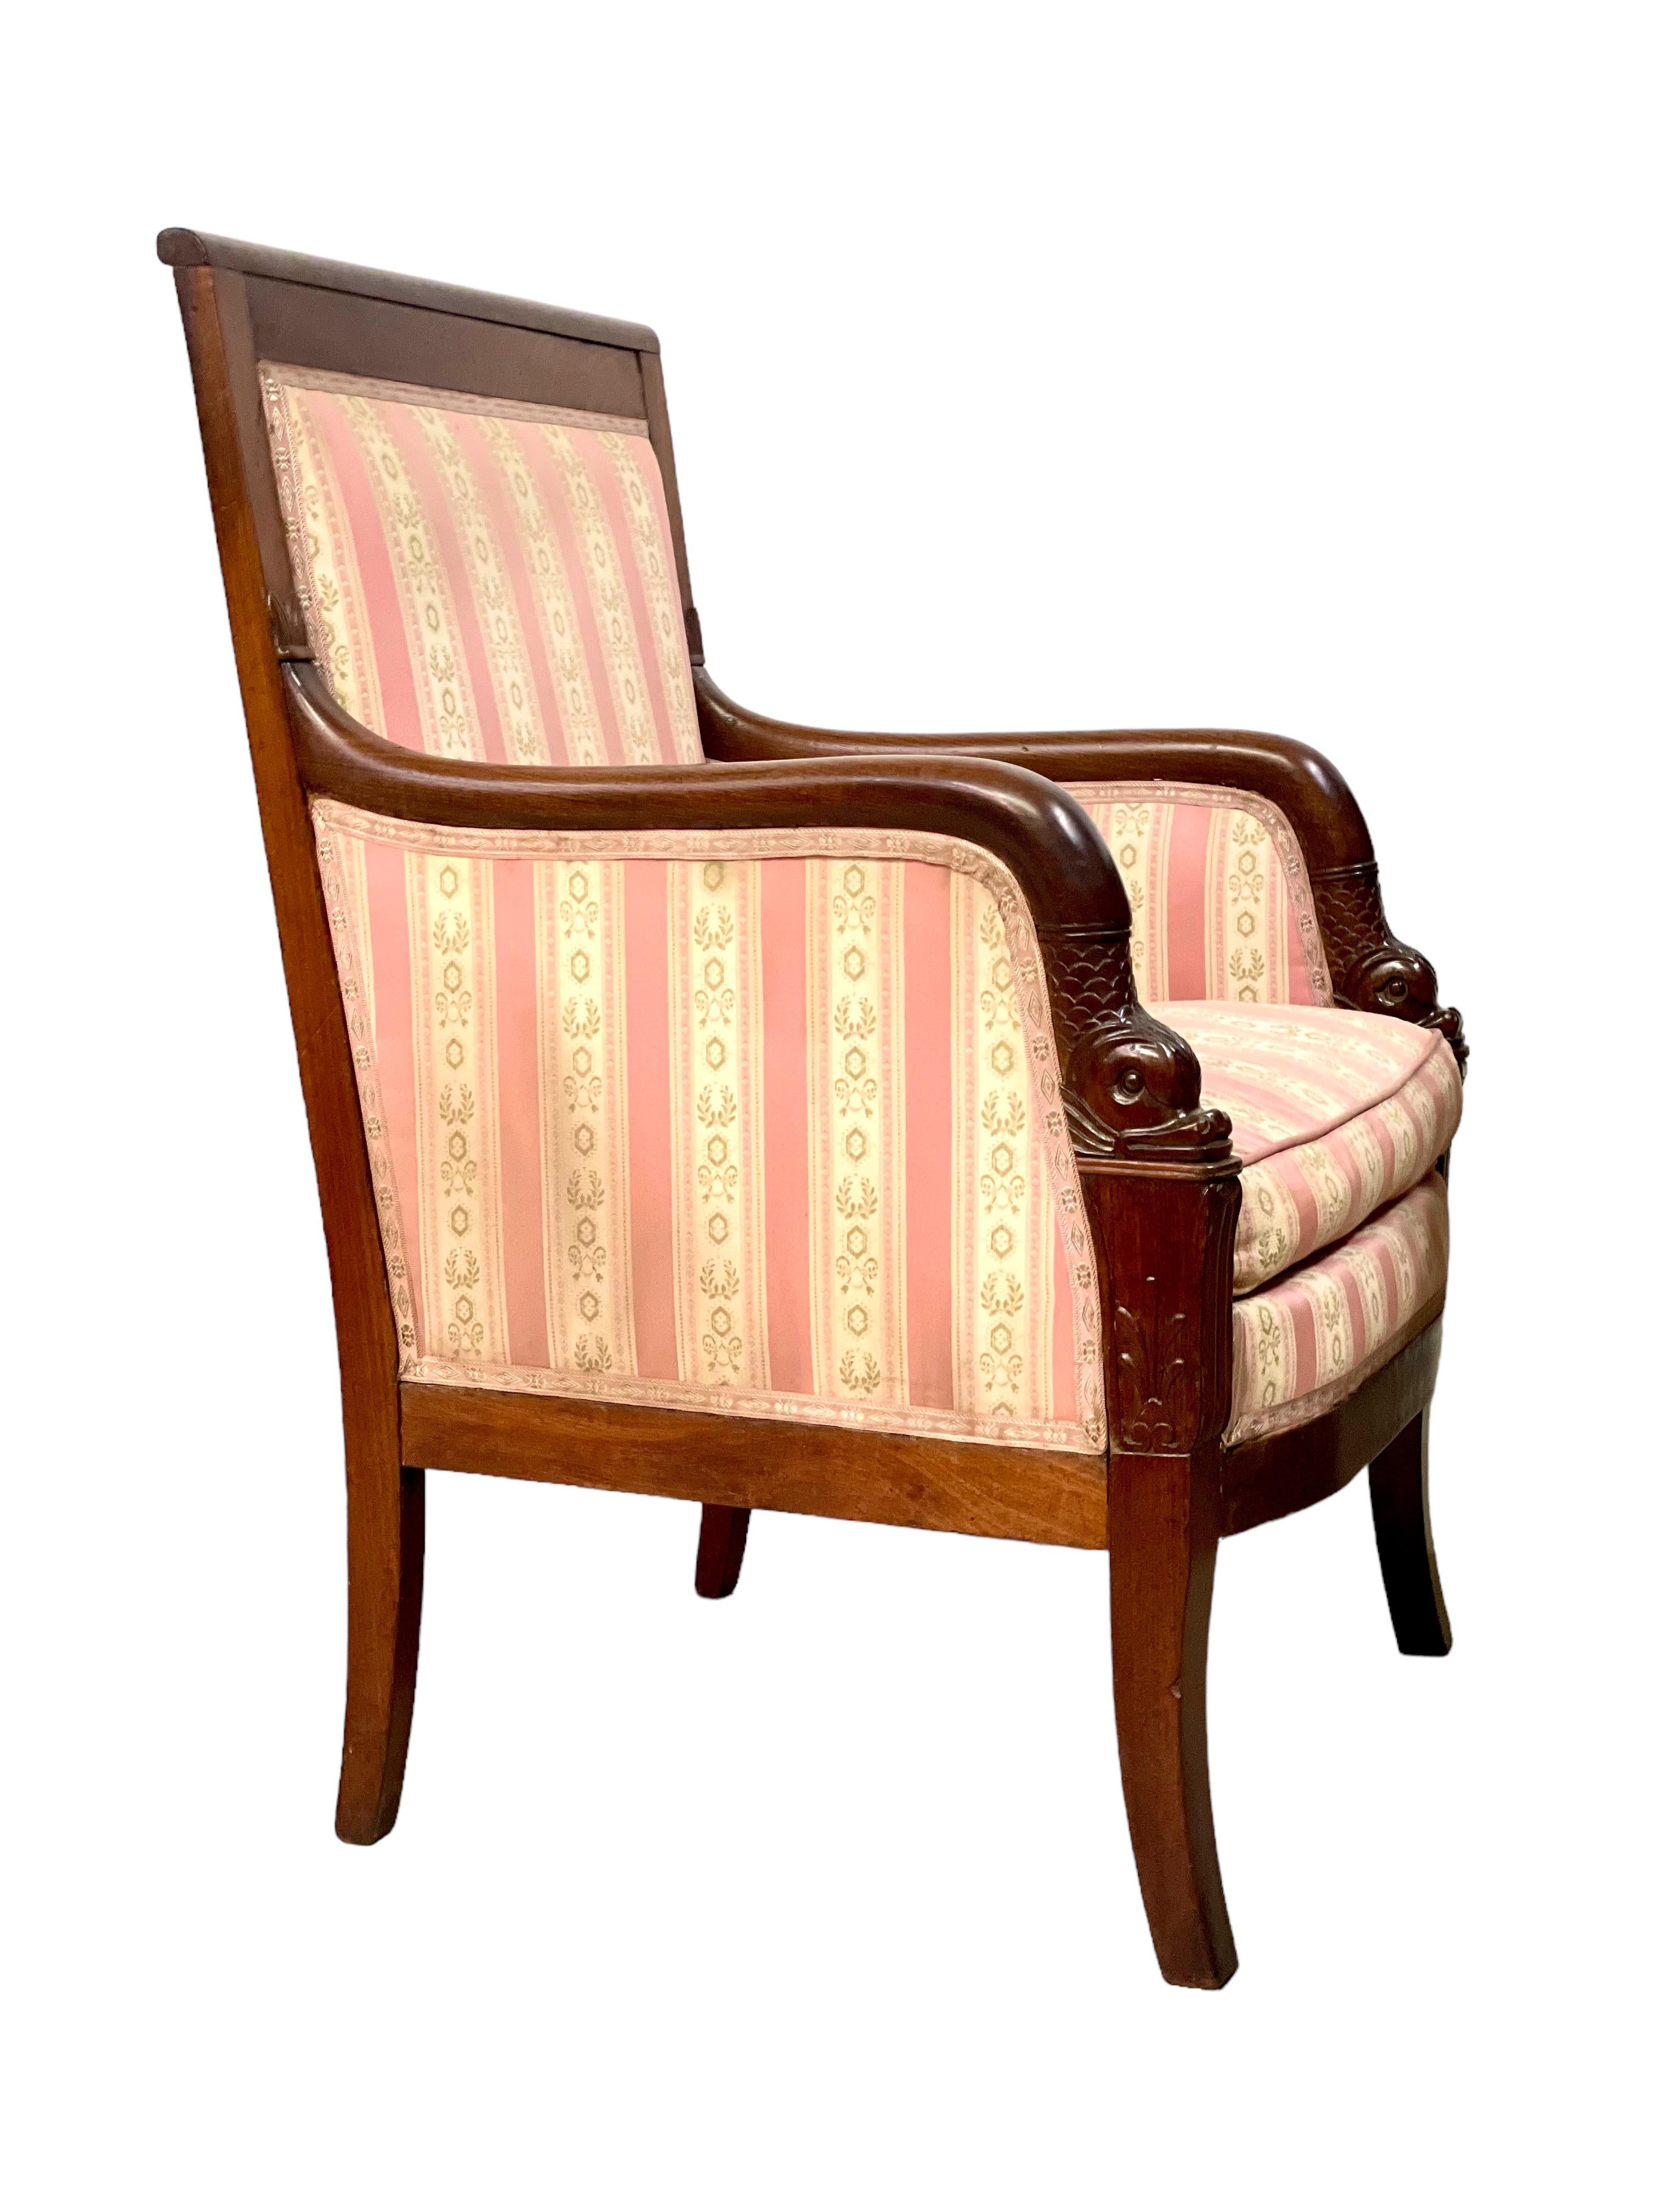 A very fine 'Bergère' armchair in solid mahogany, dating from the First Empire period (early 19th century) and generously upholstered throughout in alternating stripes of deep pink and cream. This comfortable and stylish chair features a wealth of